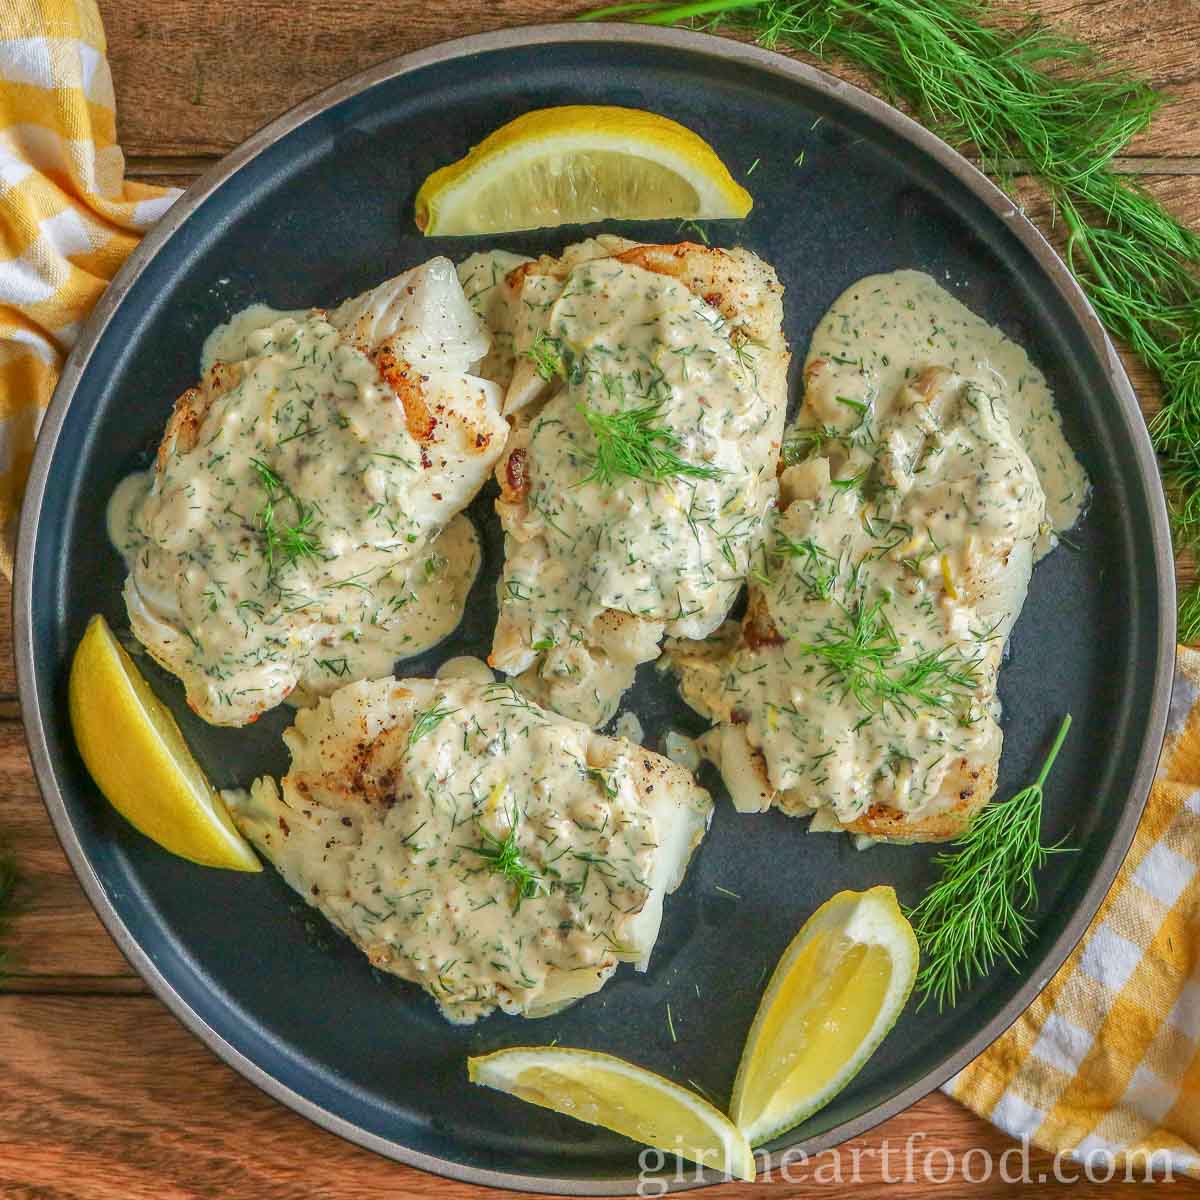 Four cod fillets with creamy dill sauce and lemon wedges on a dark blue plate.